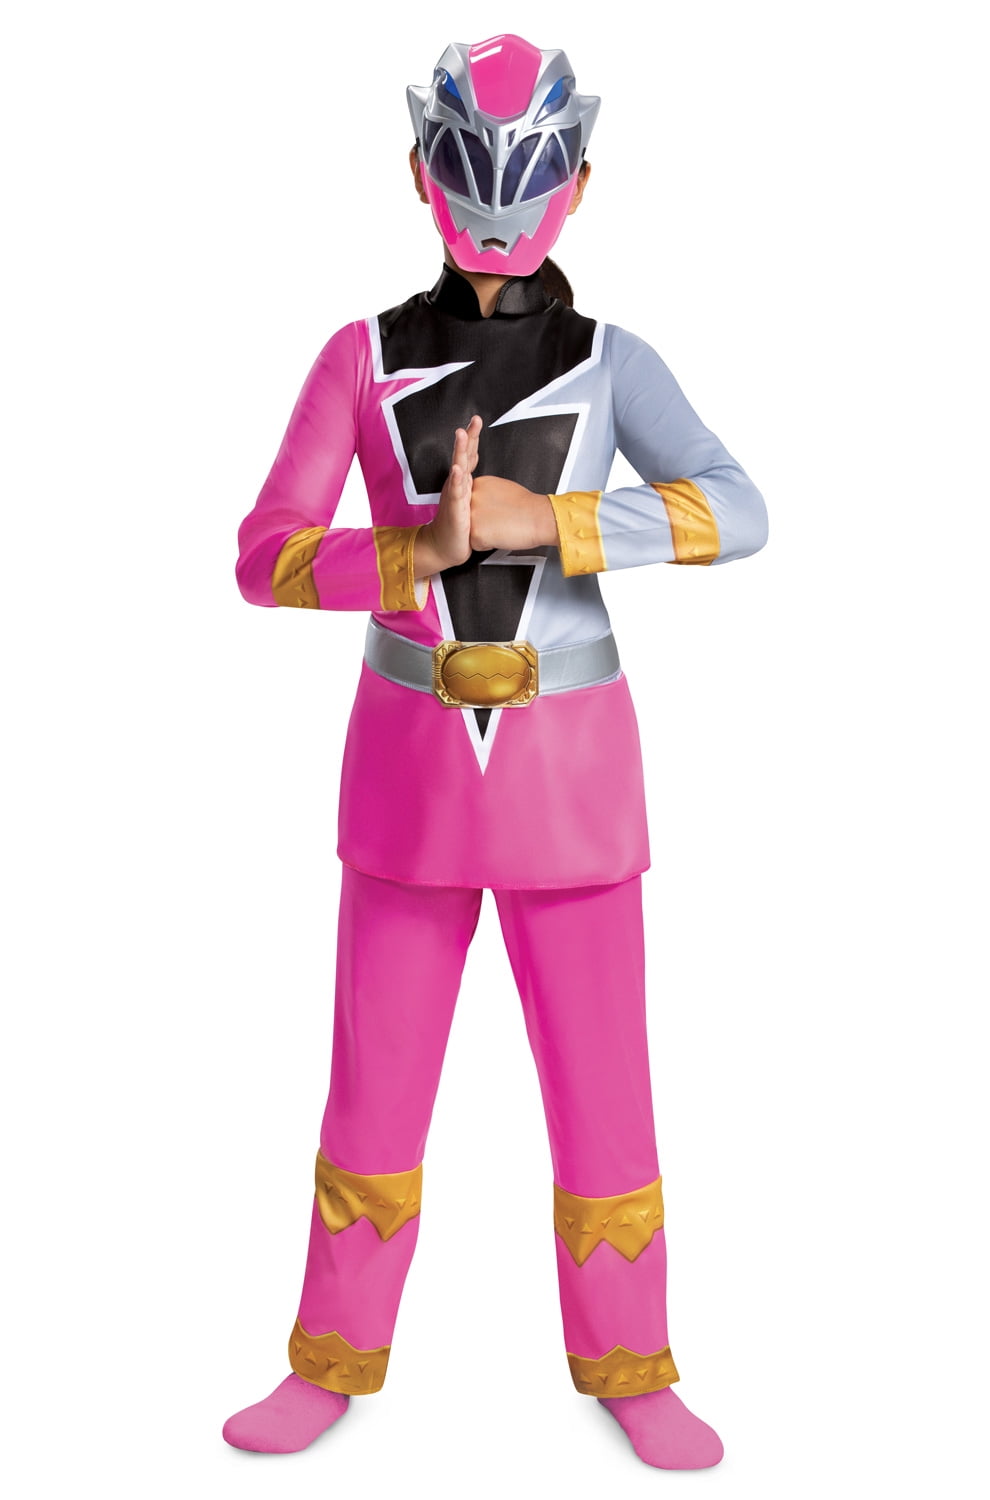 Disguise Pink Power Rangers Dino Fury Muscle Halloween Fancy-Dress Costume  for Child, Little Girls M (7-8) 